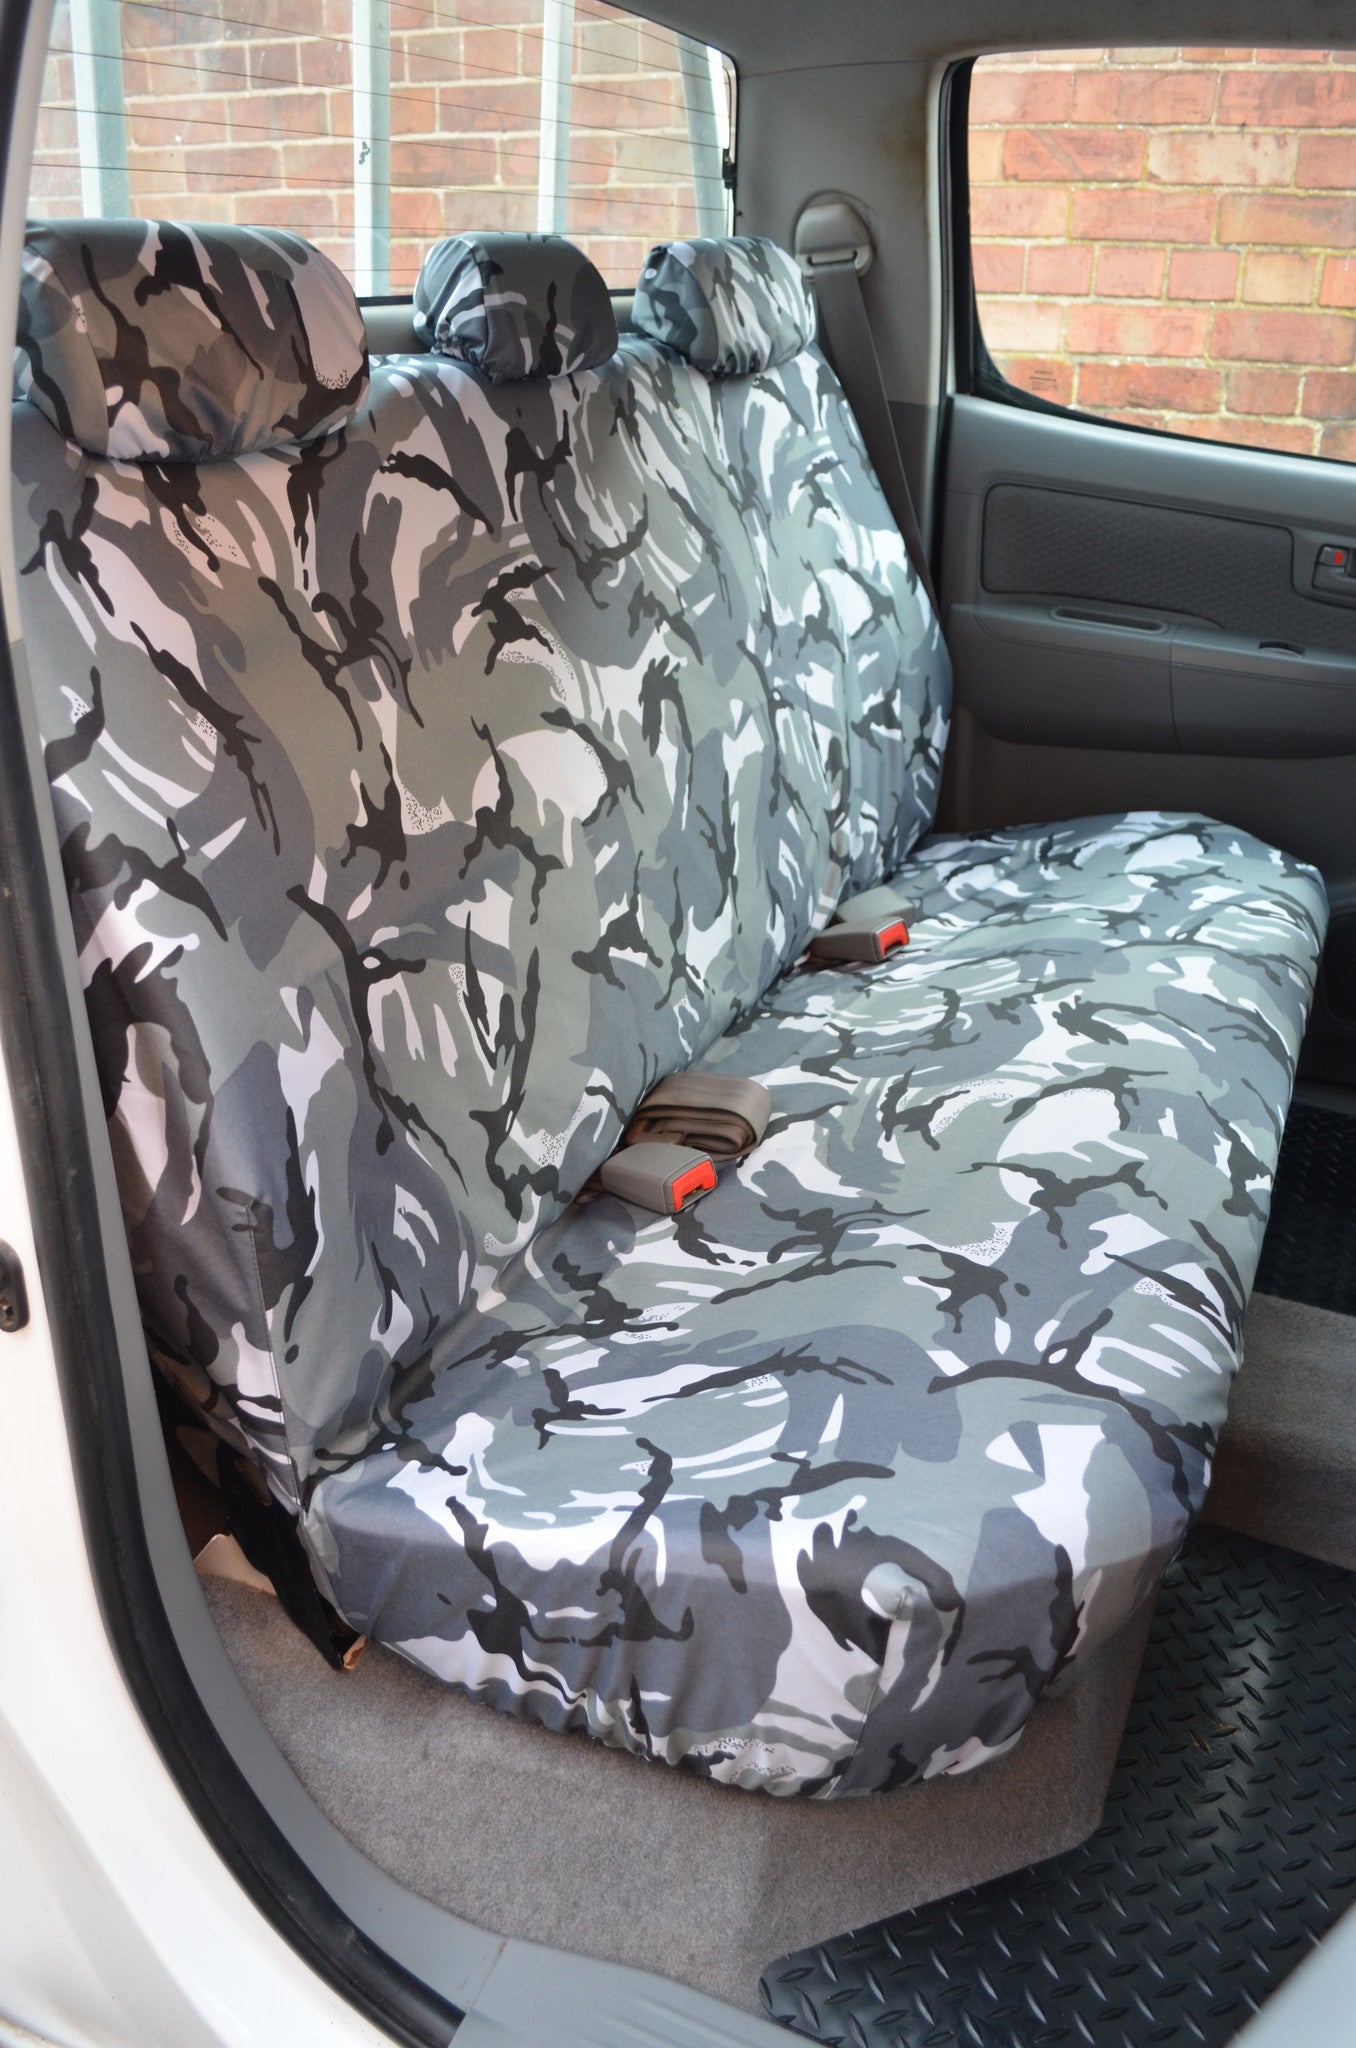 Toyota Hilux Invincible 2005 - 2016 Seat Covers Rear Seat Cover / Urban Camouflage Turtle Covers Ltd